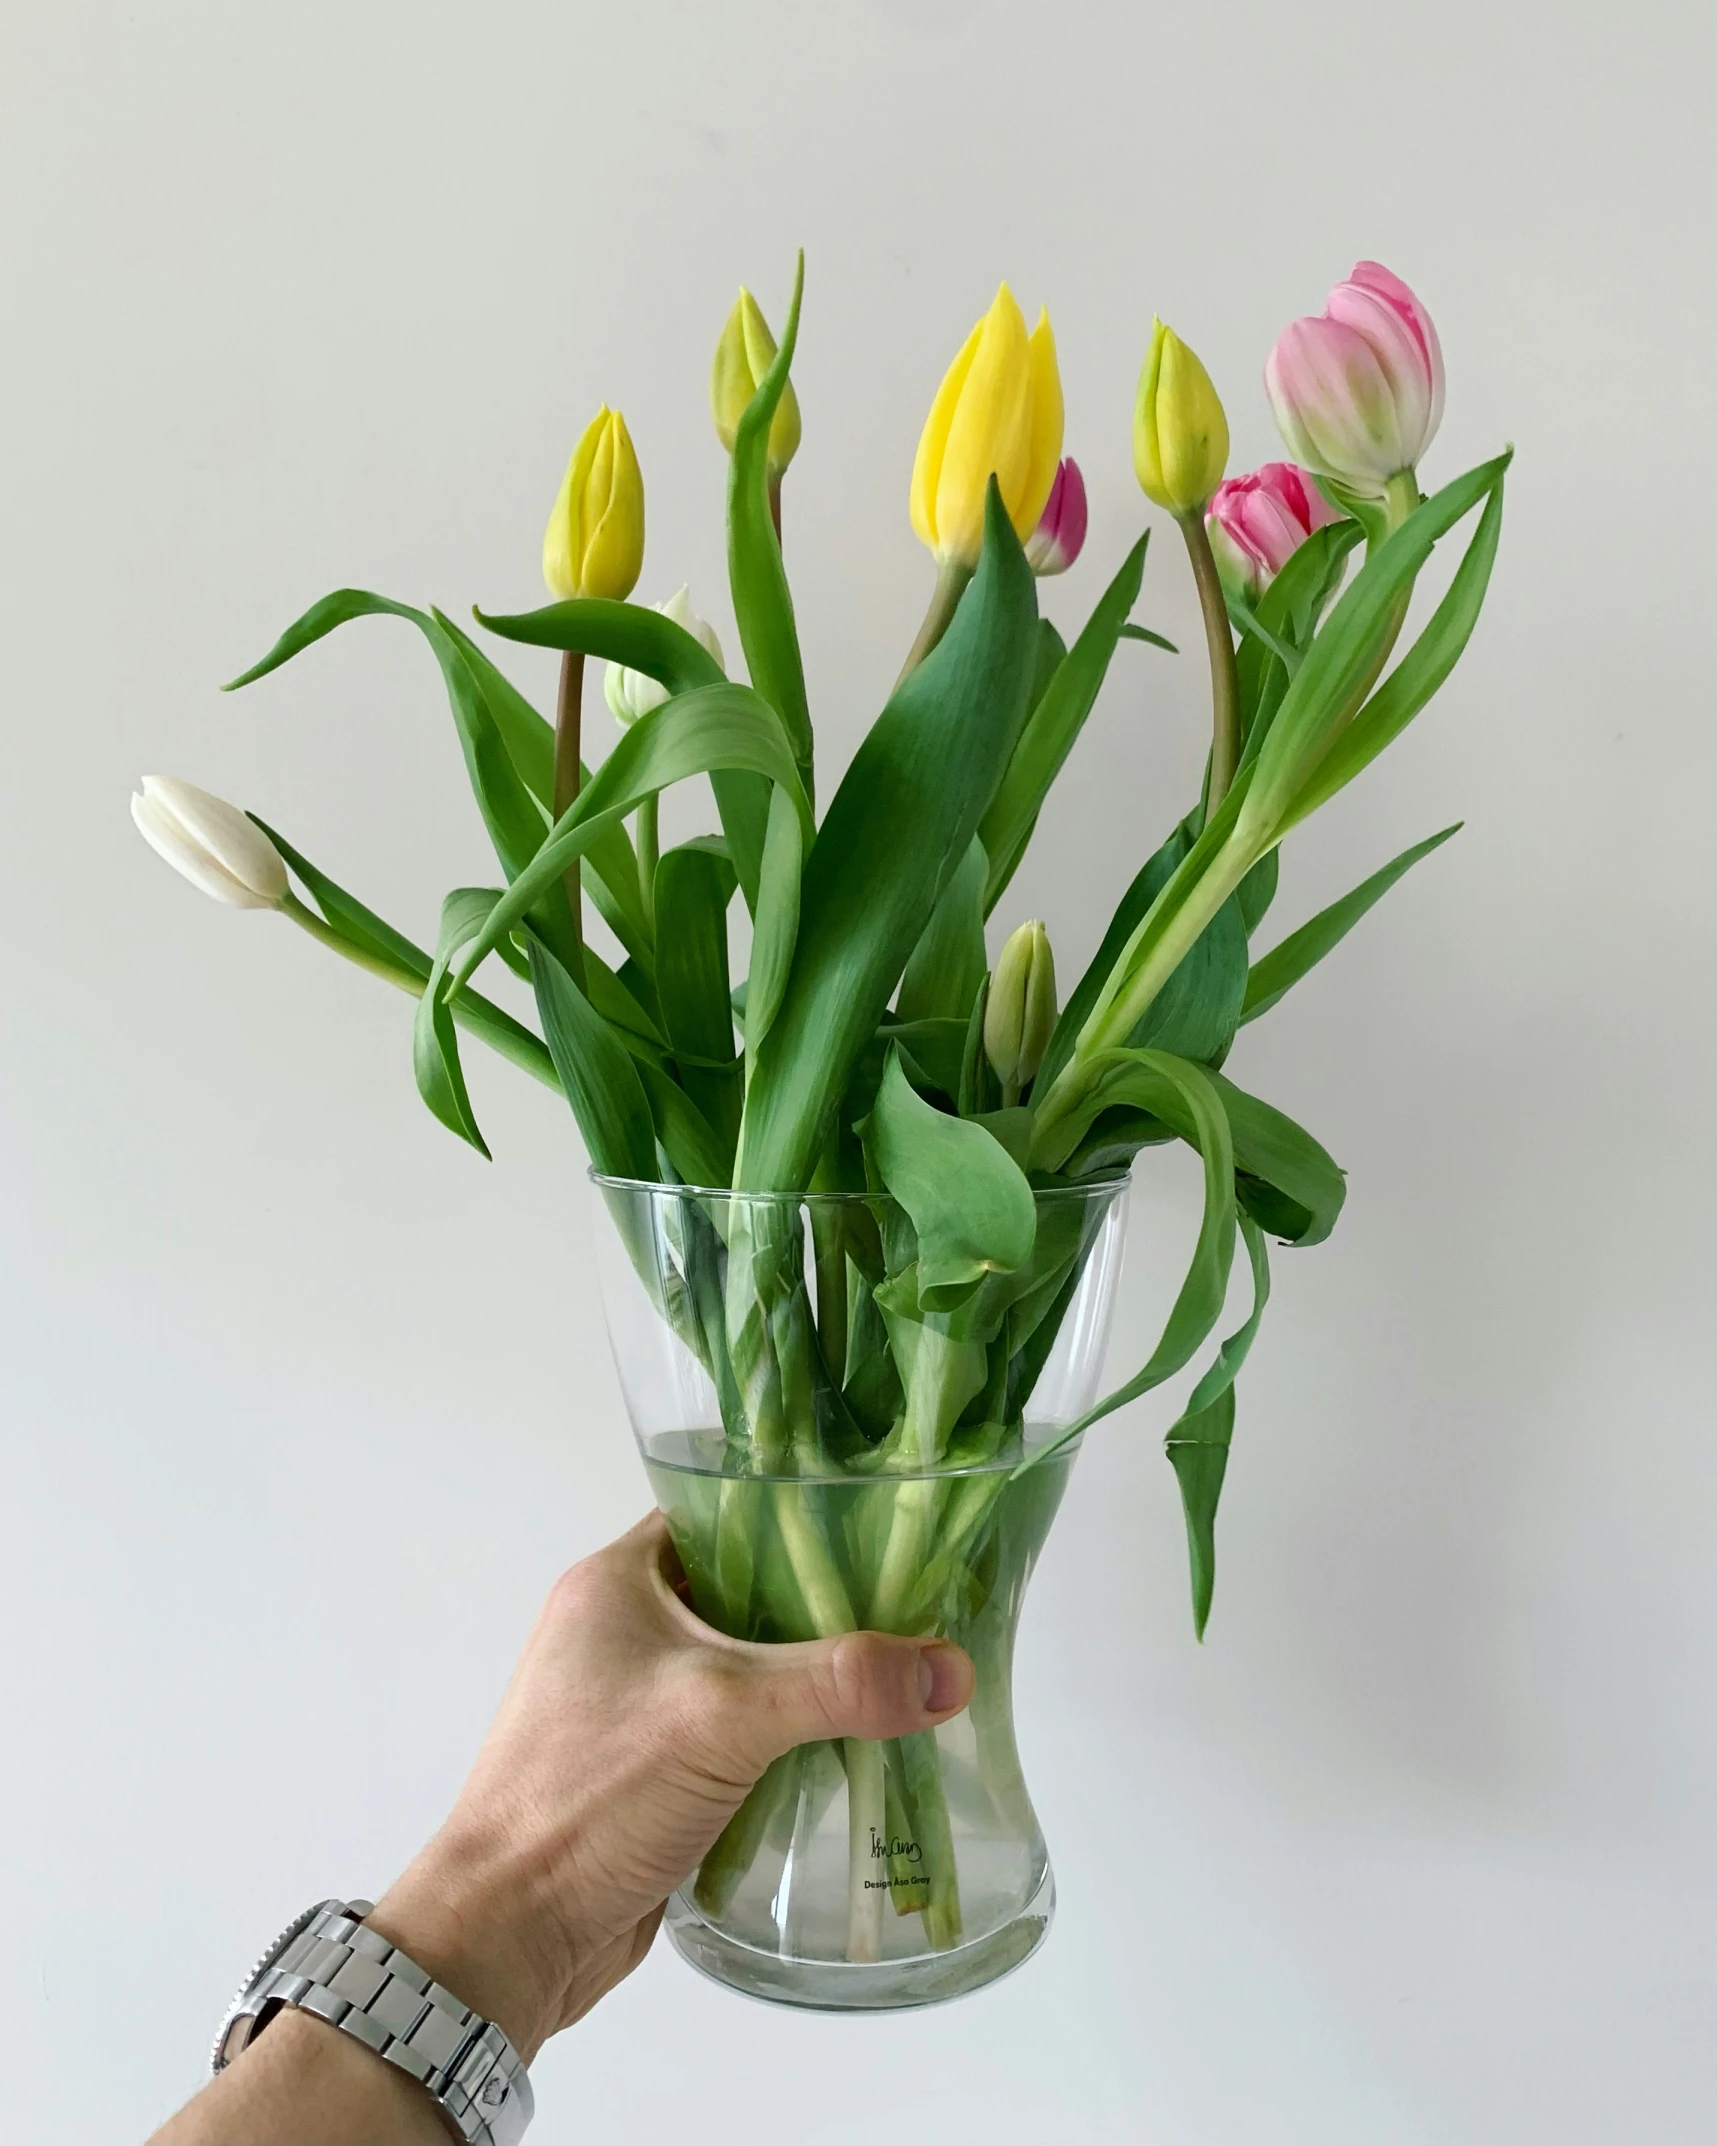 a person is holding a vase with a bunch of flowers